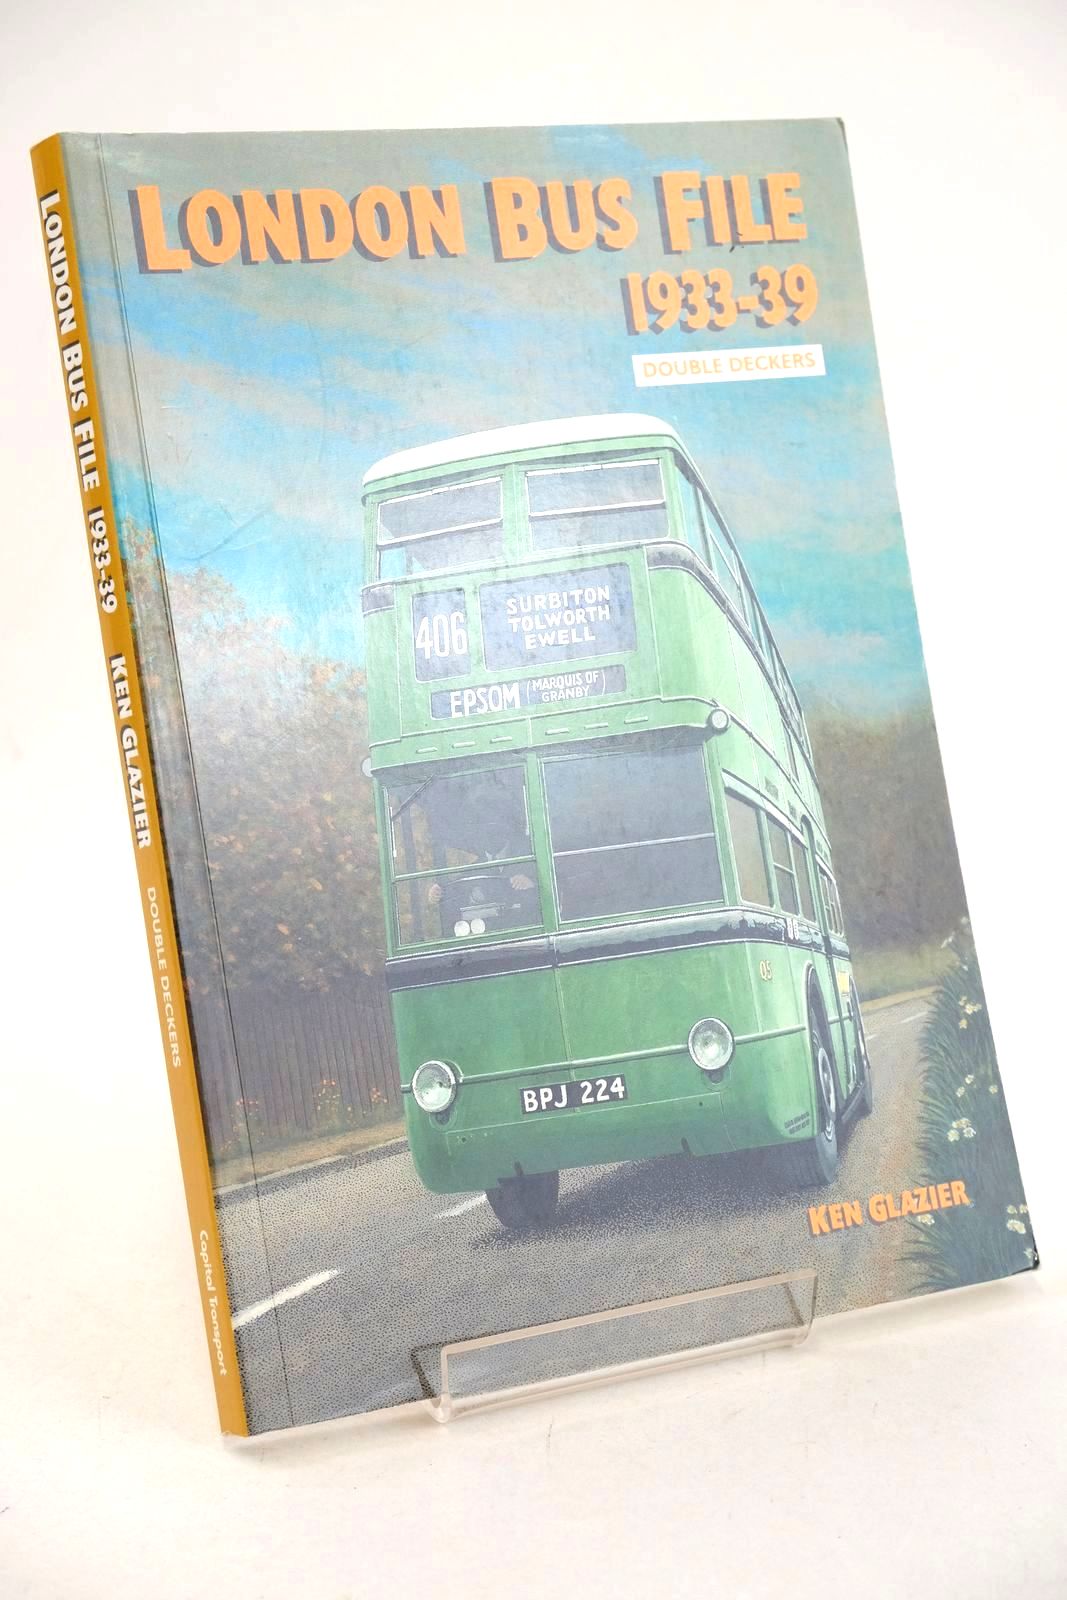 Photo of LONDON BUS FILE 1933-39: DOUBLE DECKERS- Stock Number: 1326928